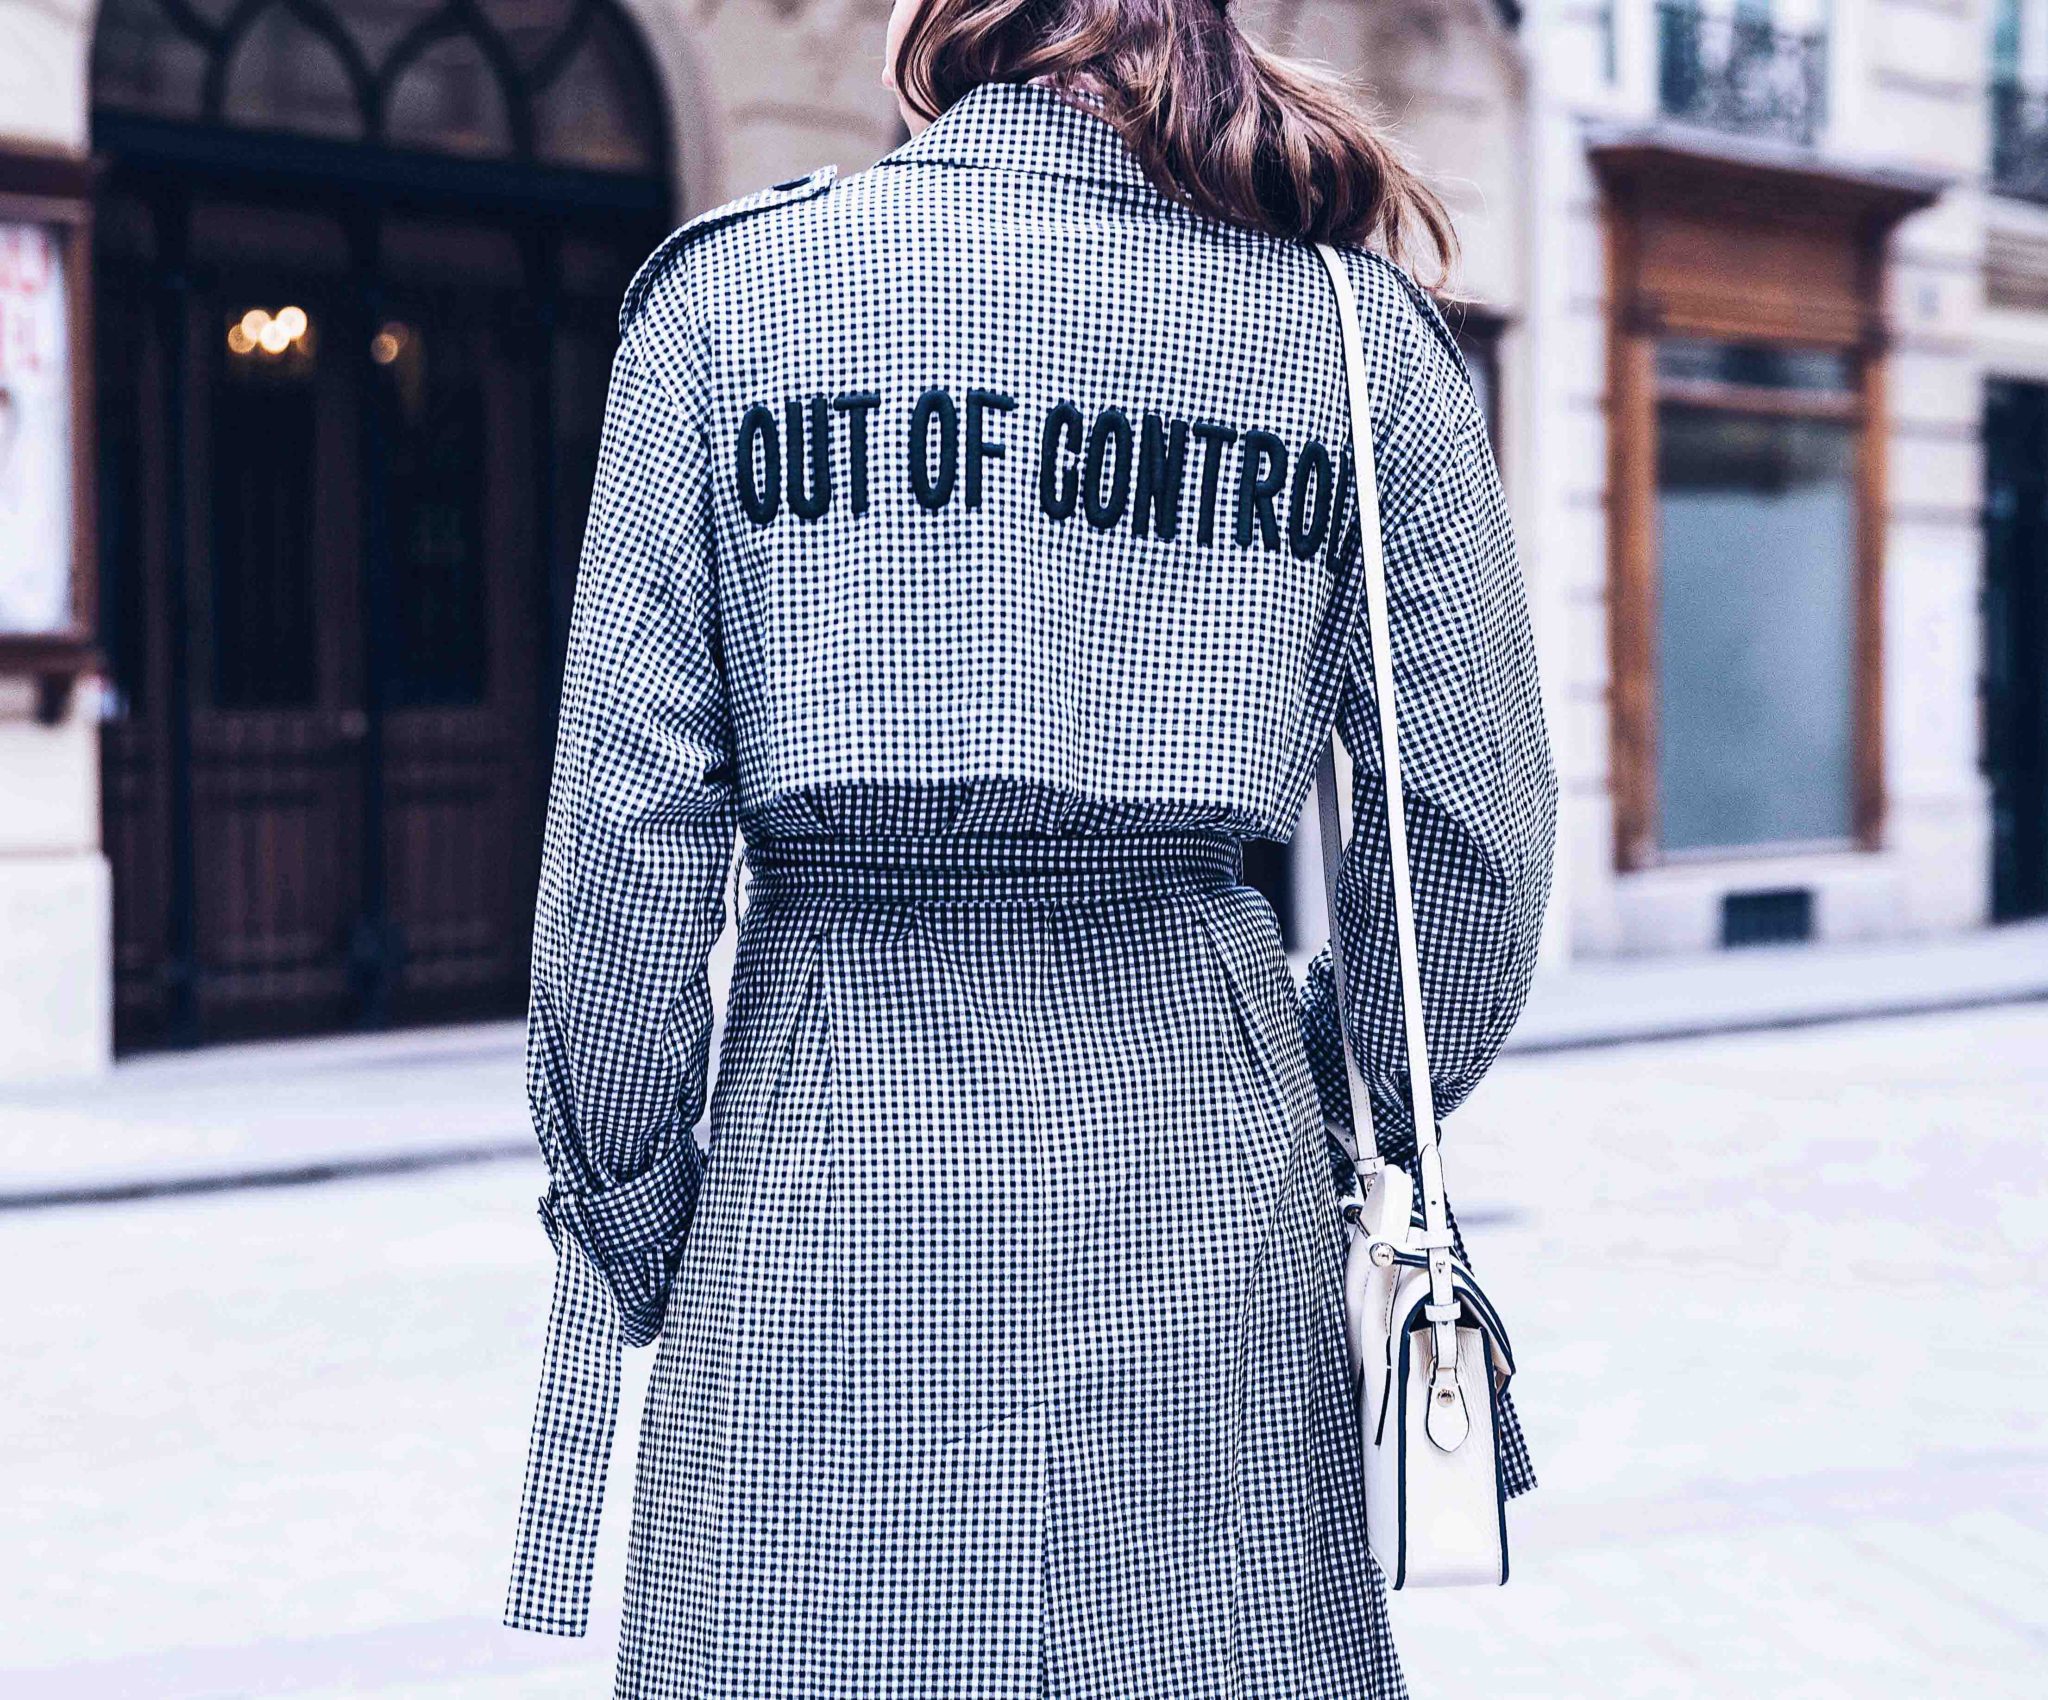 Spring Trench Coat - Gingham Trench Coat - Long Trench coat - Out Of Control - Mo&Co - Paris - Fashion Blogger